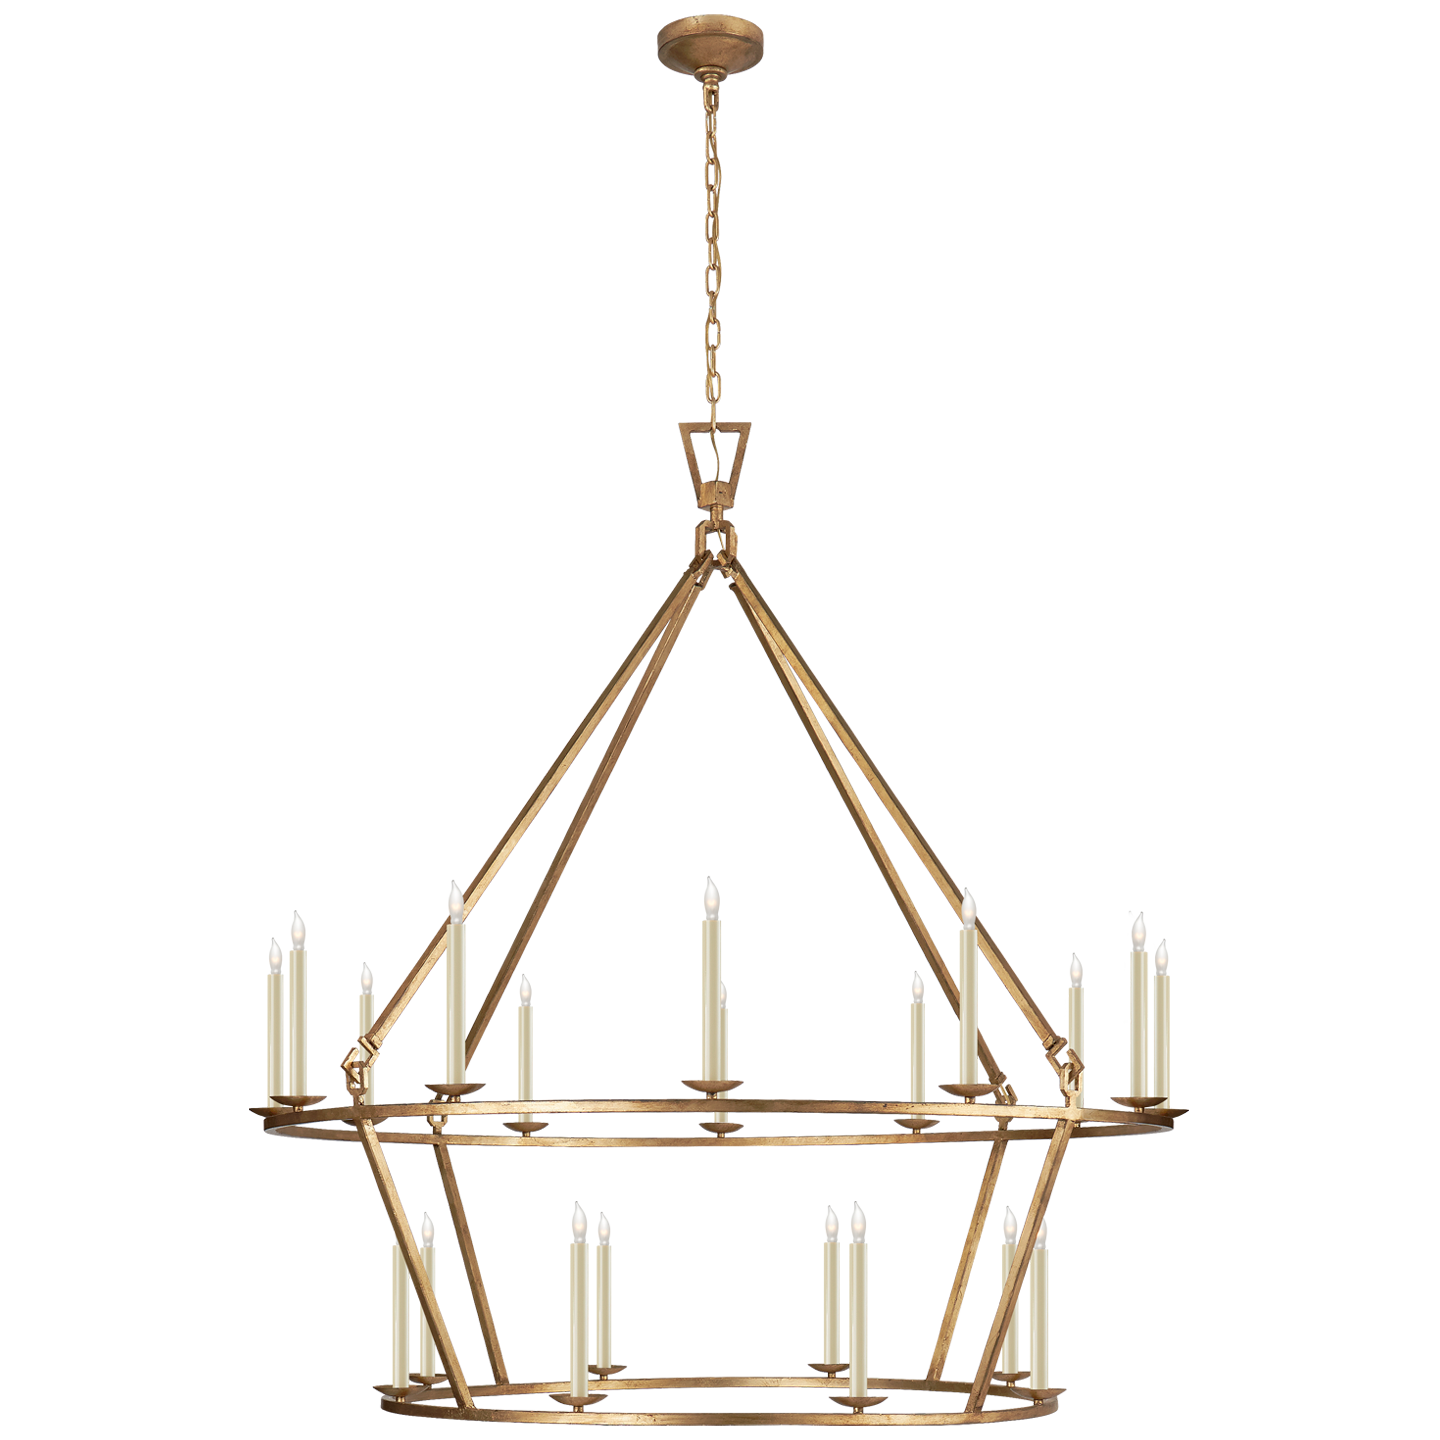 Visual Comfort Darlana Extra Large Two-Tier Chandelier